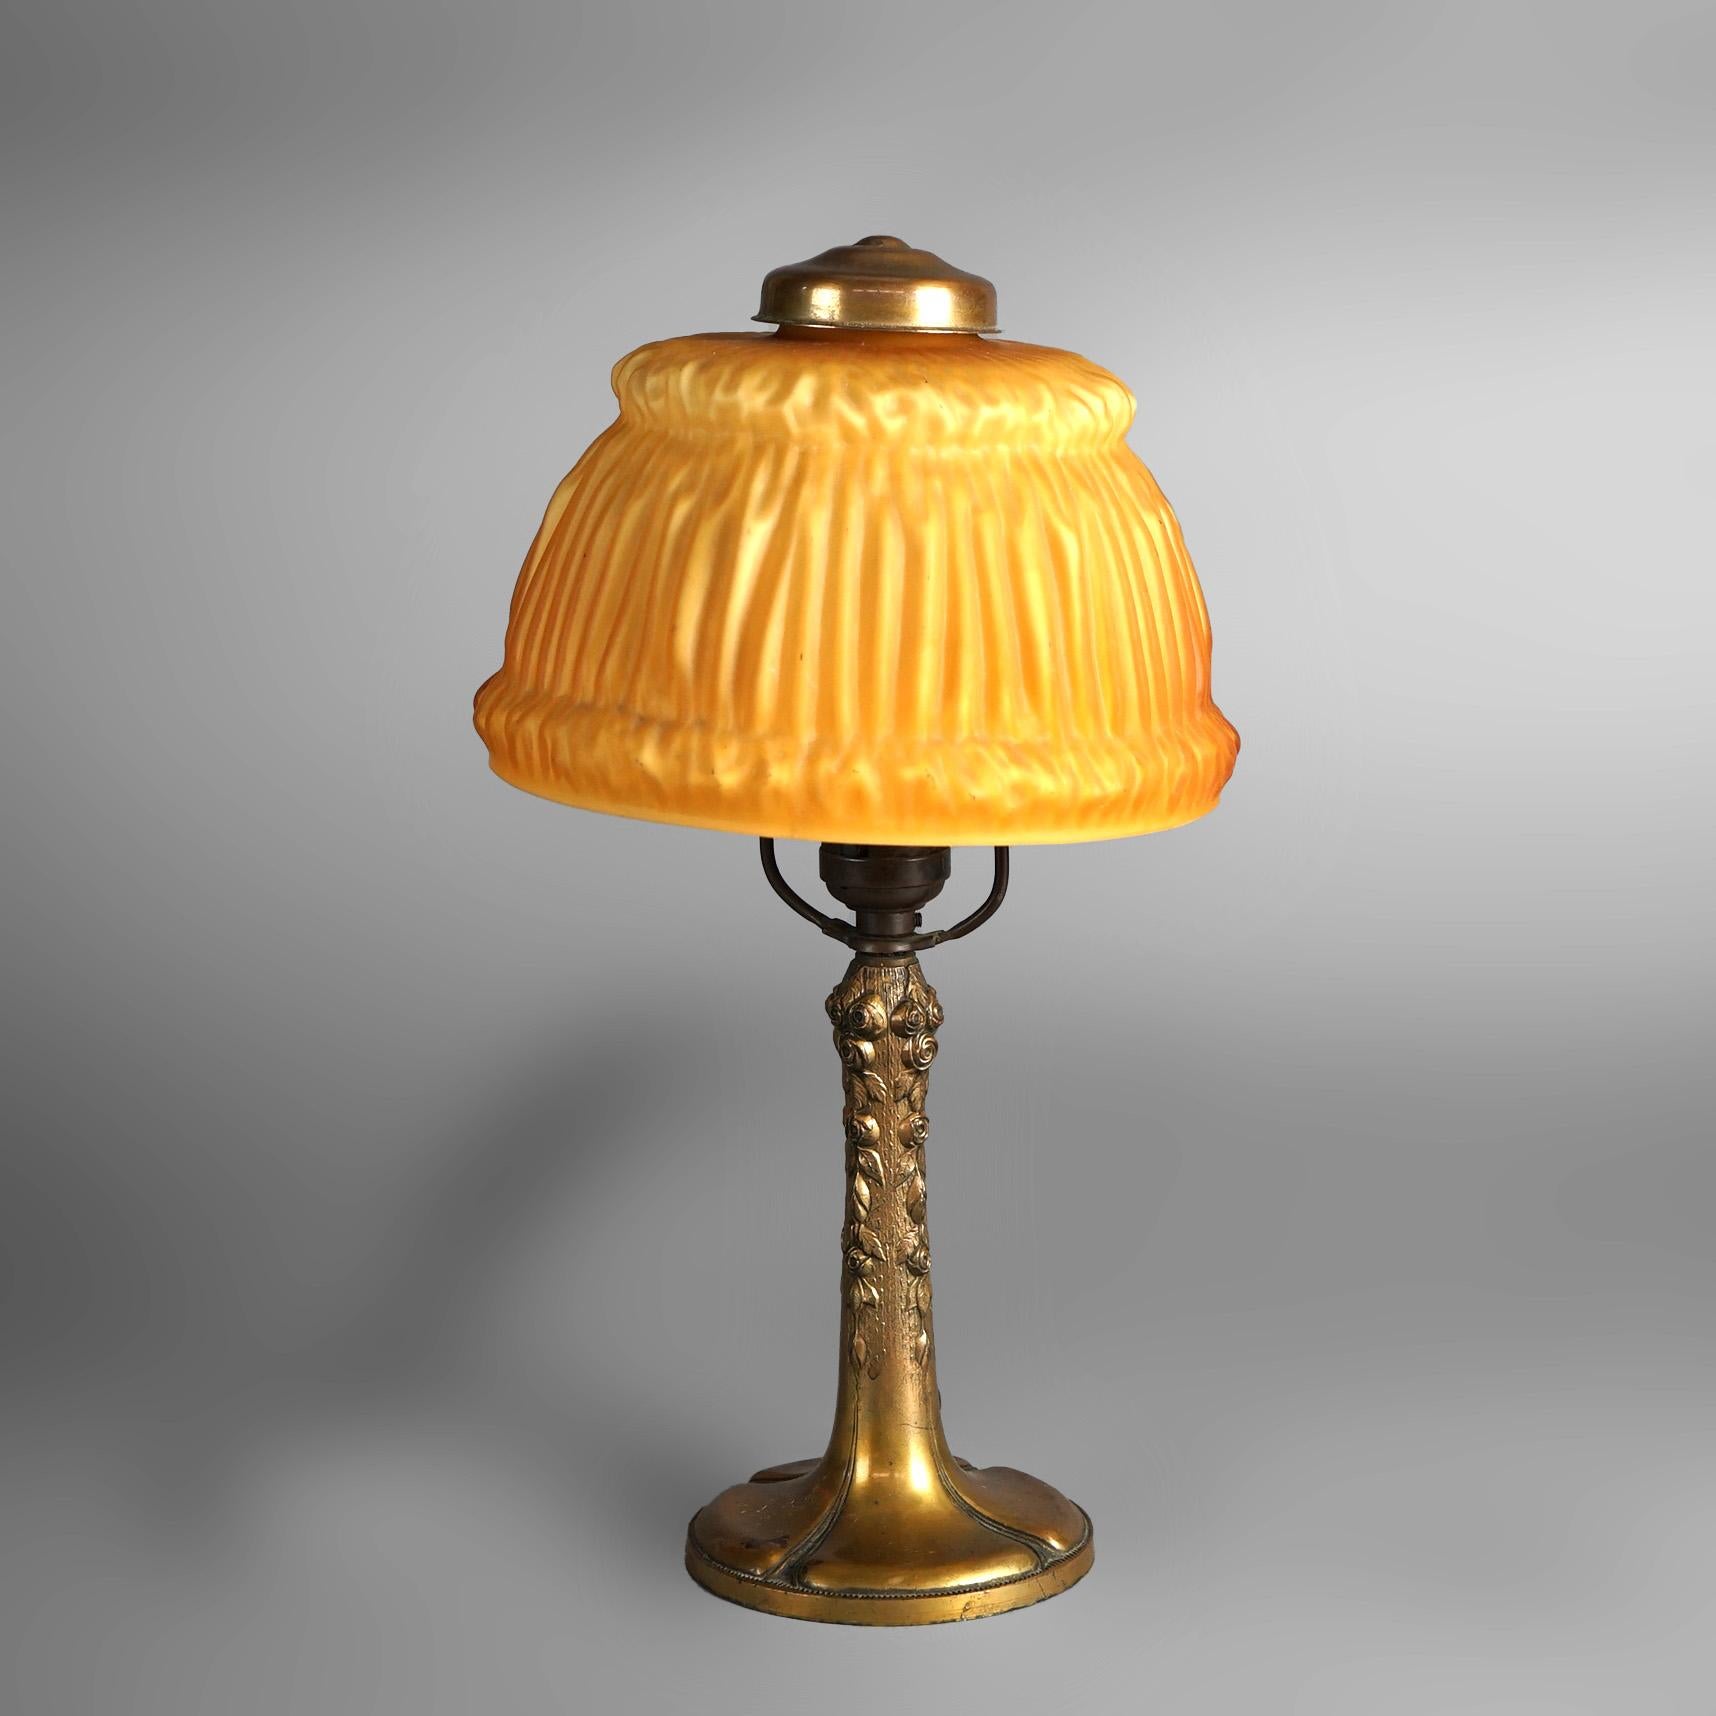 Antique Handel Bronze Boudoir Table Lamp & Amber Pleated Cased Glass Shade C1920

Measures- 14.25''H x 7''W x 7''D